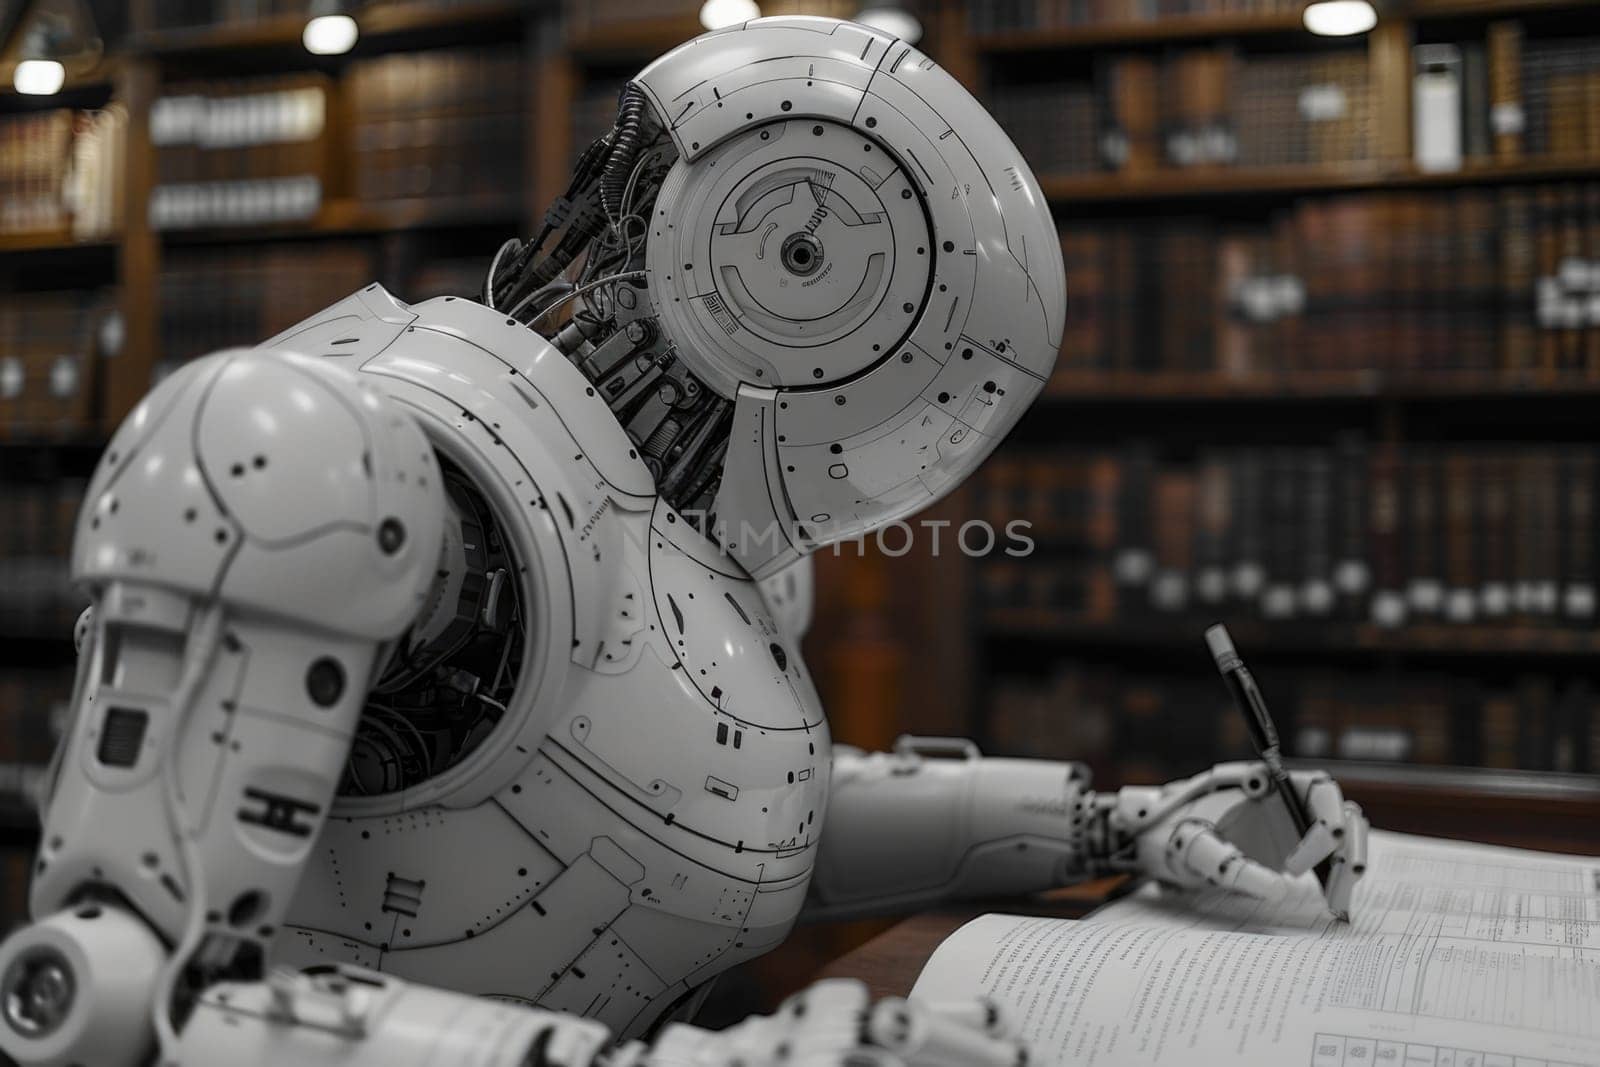 Robot Studying Book in Library by but_photo